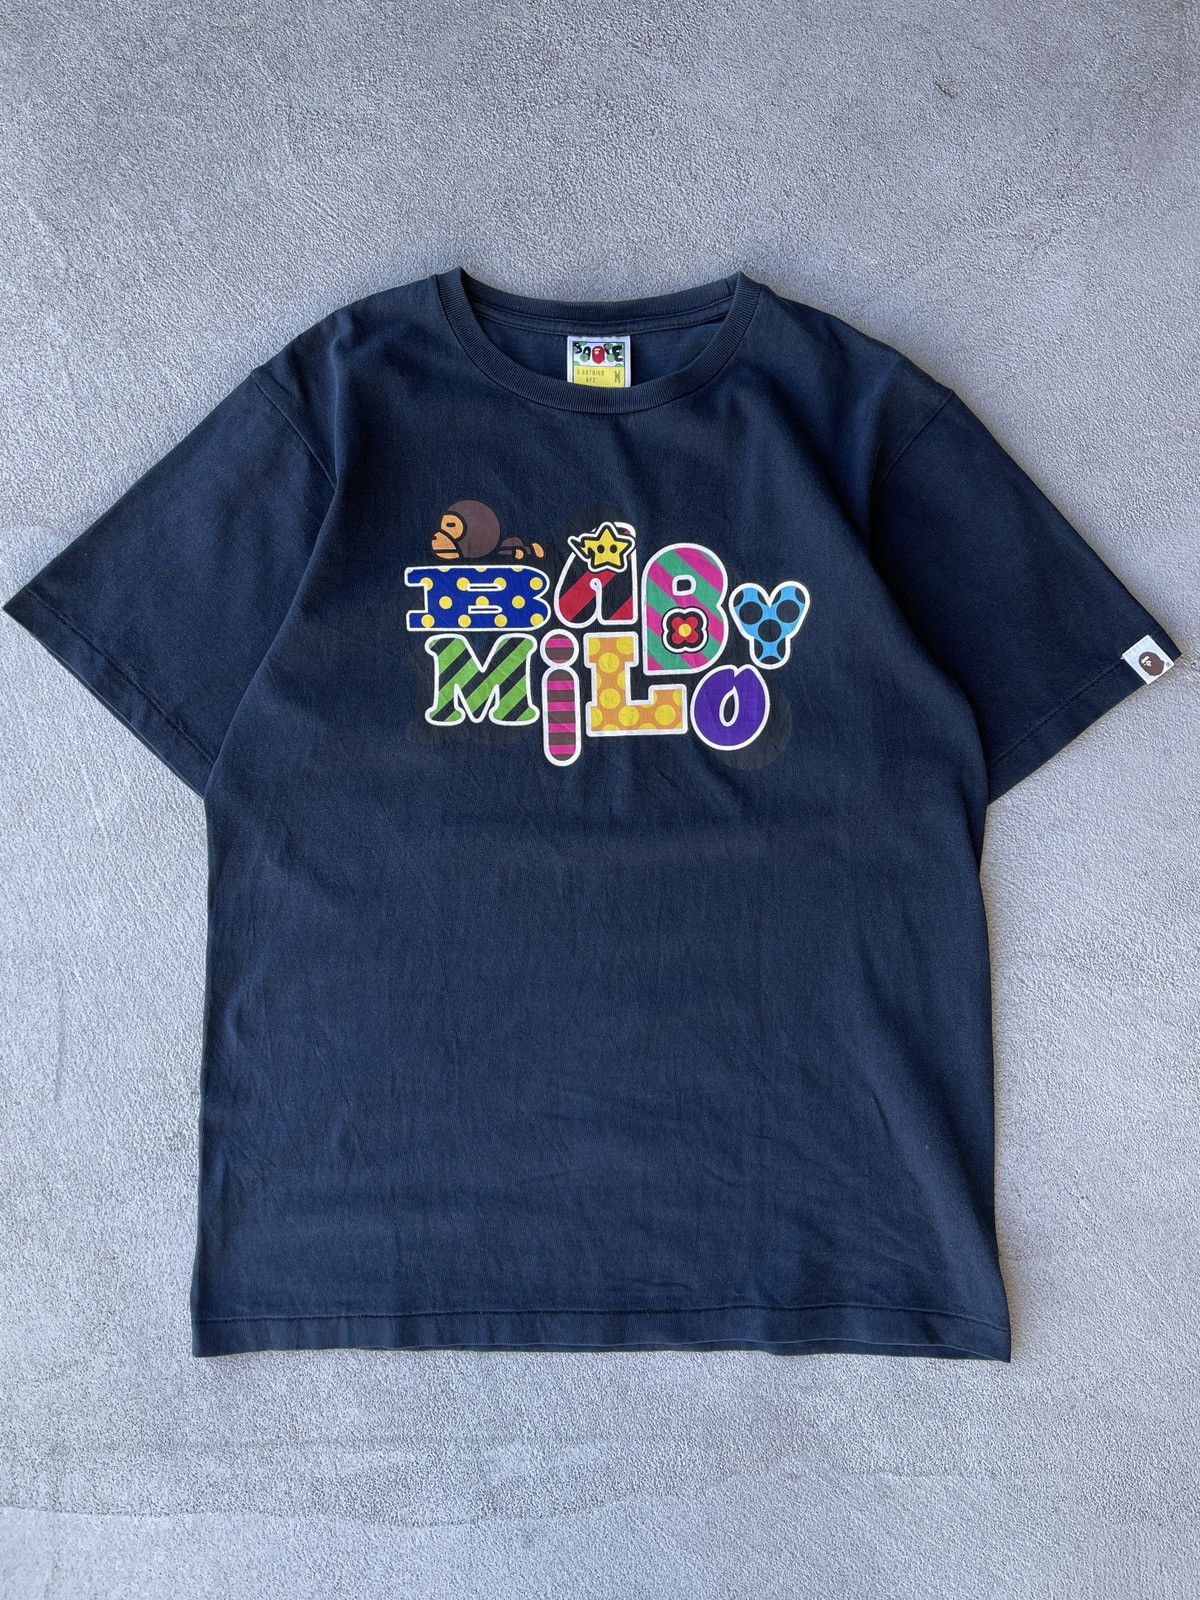 Bape Baby Milo Magical Spell-out Tee (M) - 1